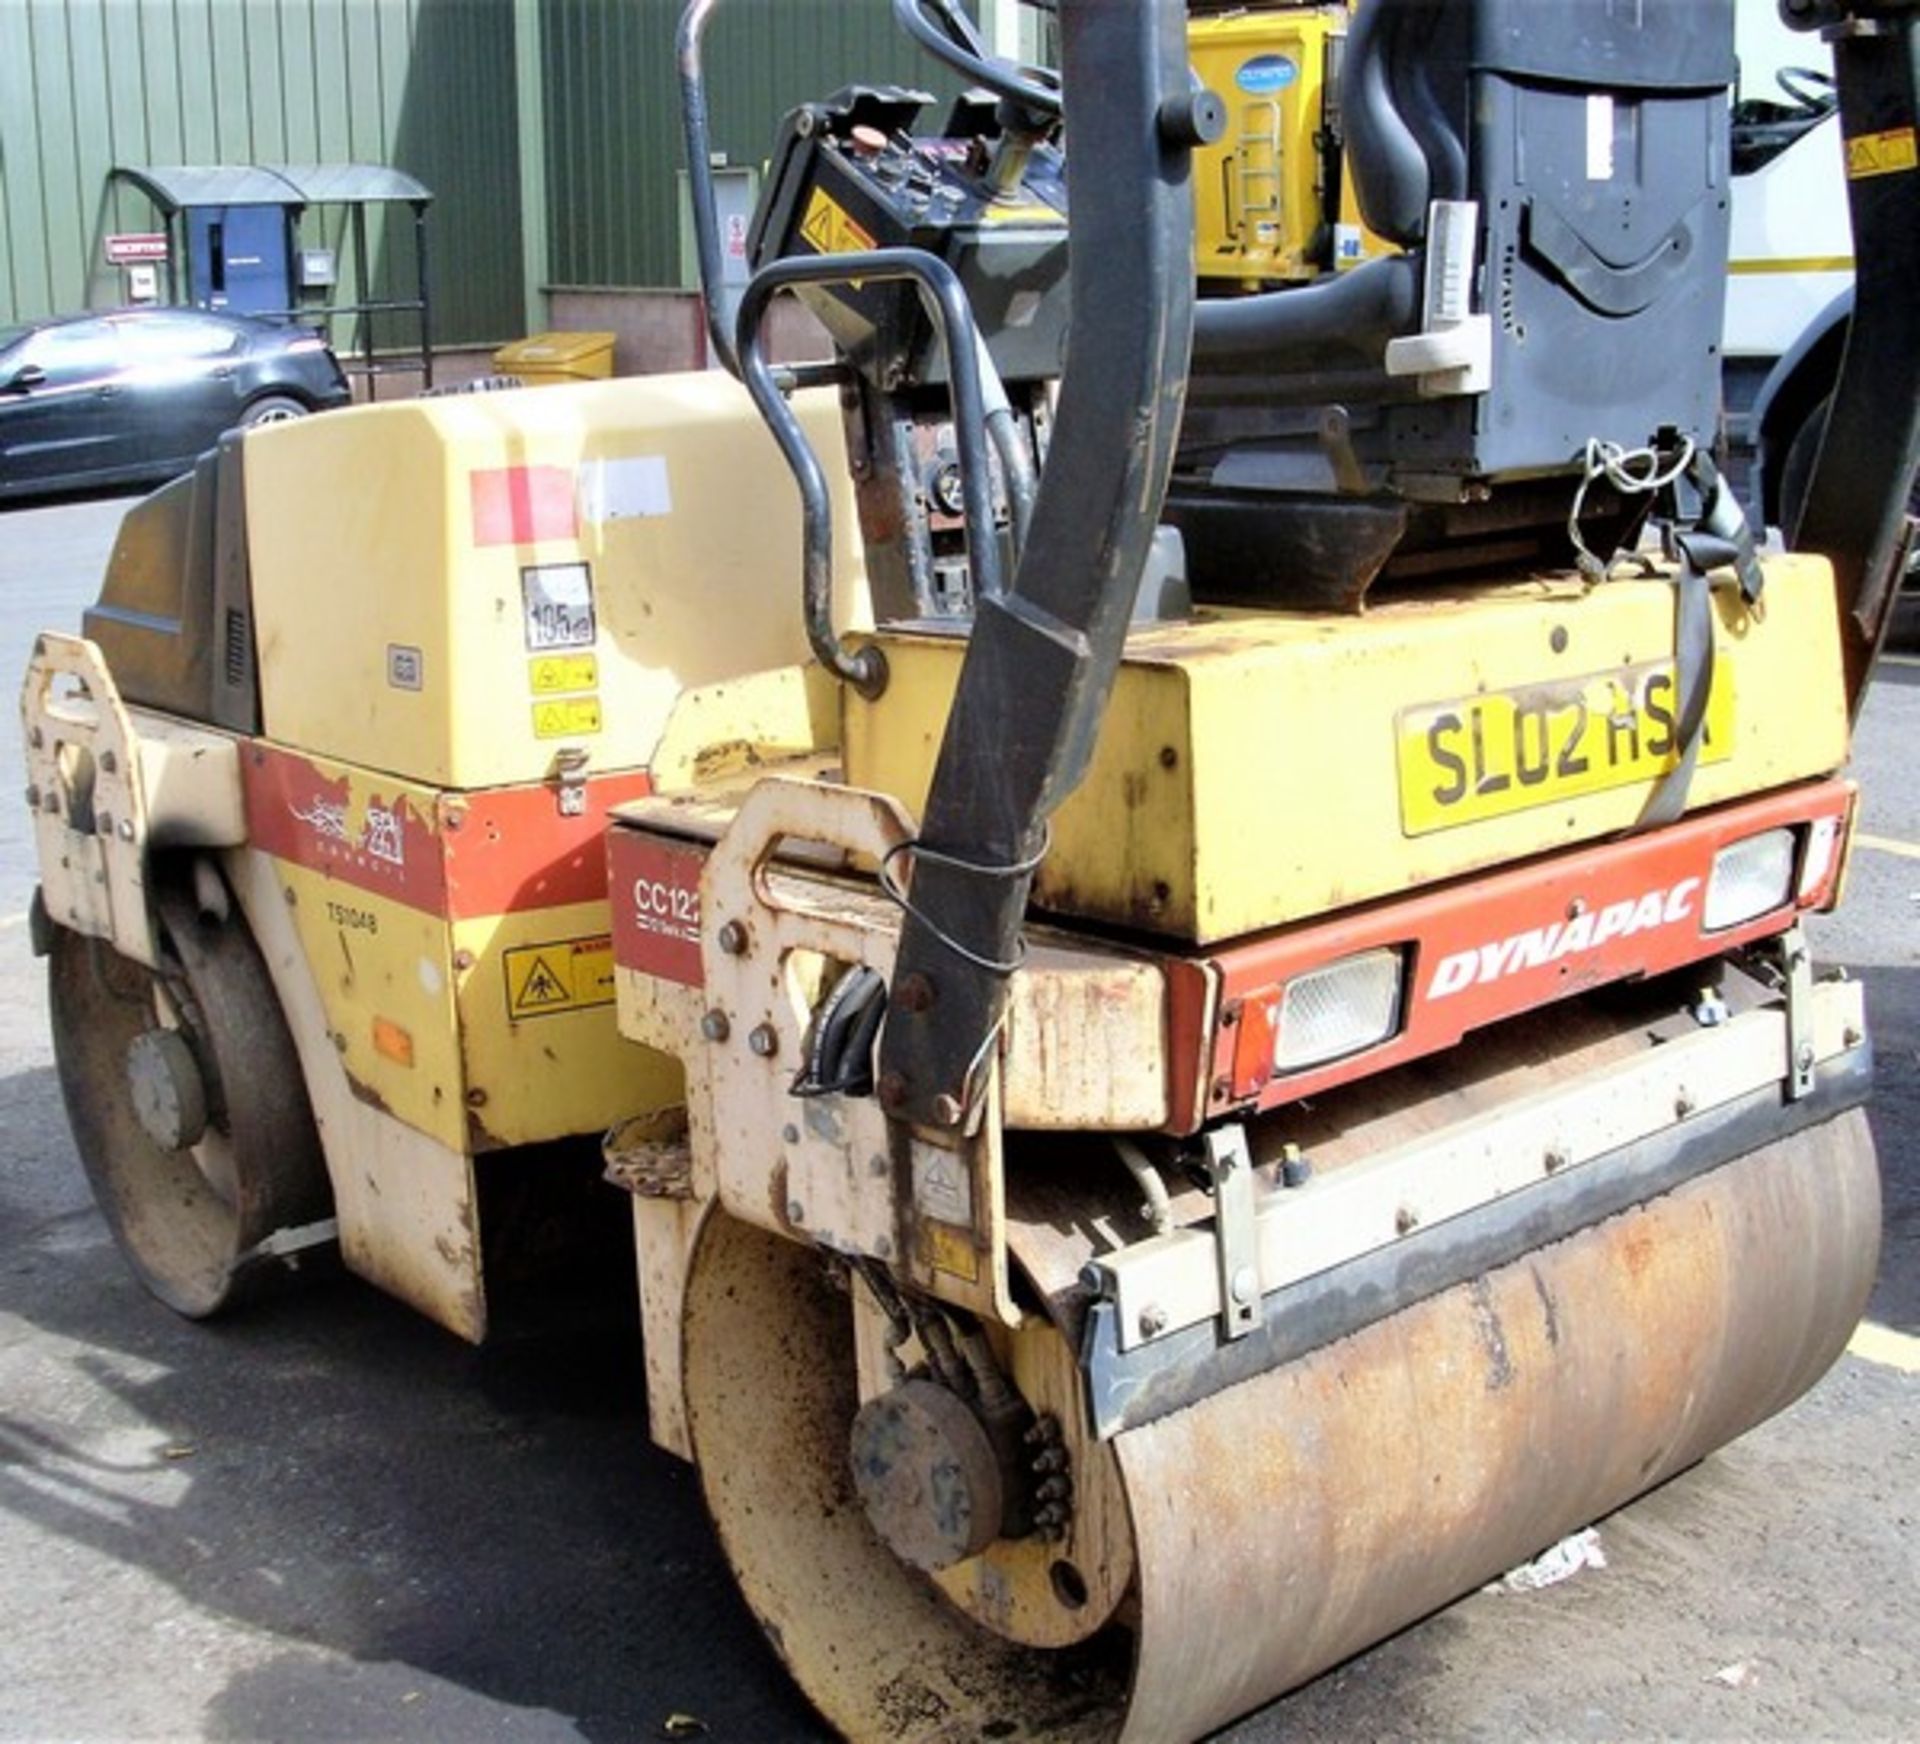 2002 DYNOPAC double drum roller. Service history. Reg No SL02 HSA. 2000hrs (not verified) - Image 2 of 14